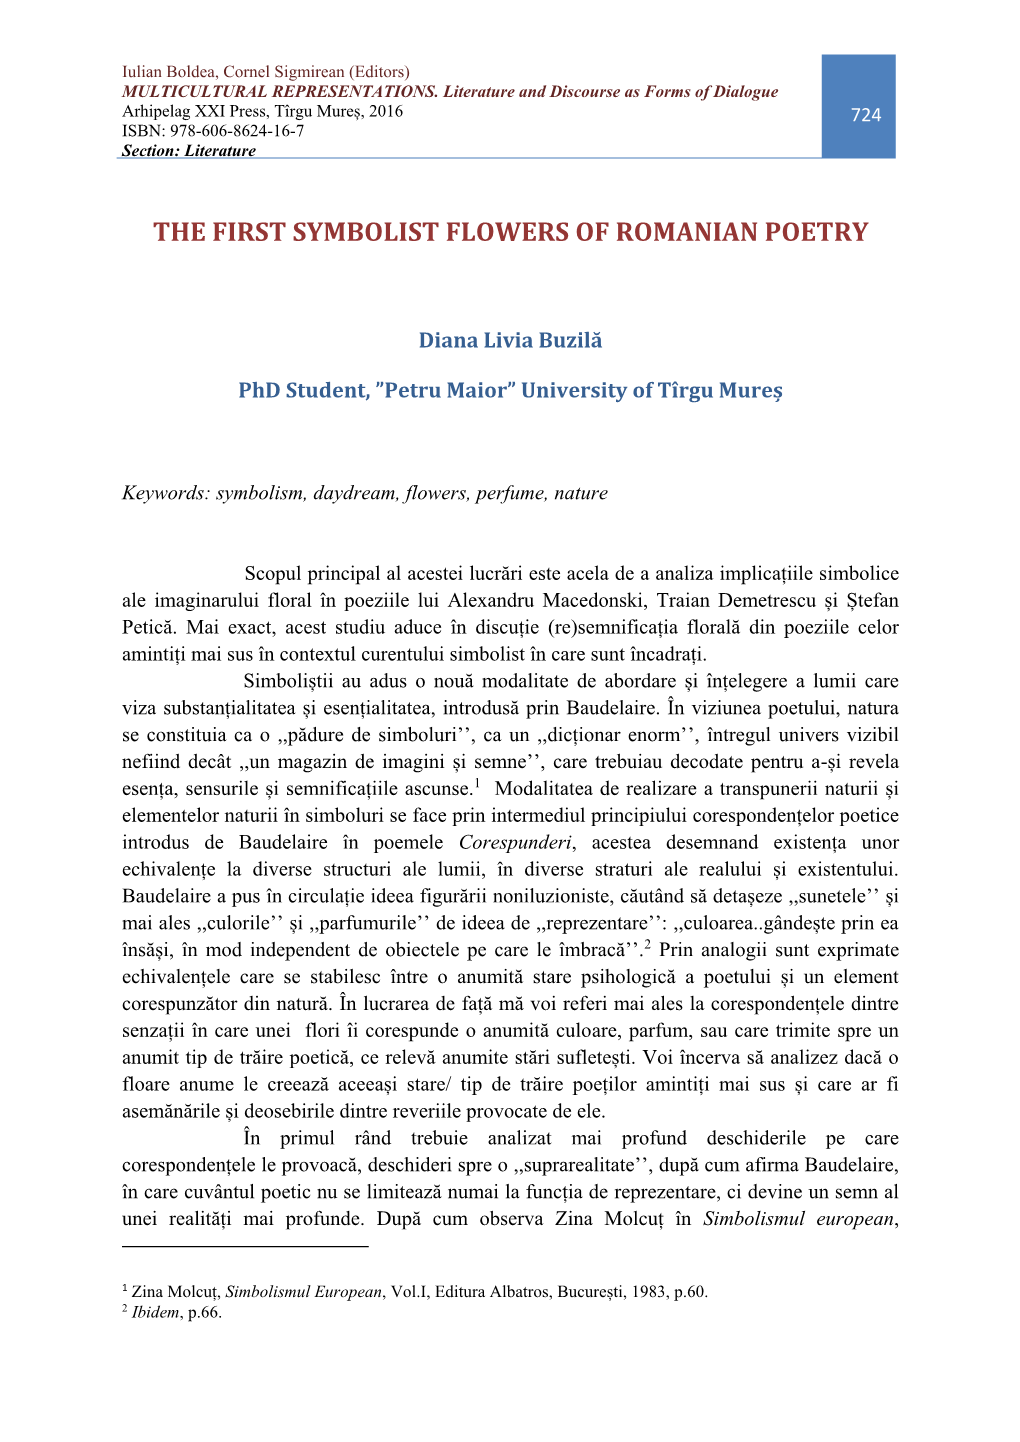 The First Symbolist Flowers of Romanian Poetry